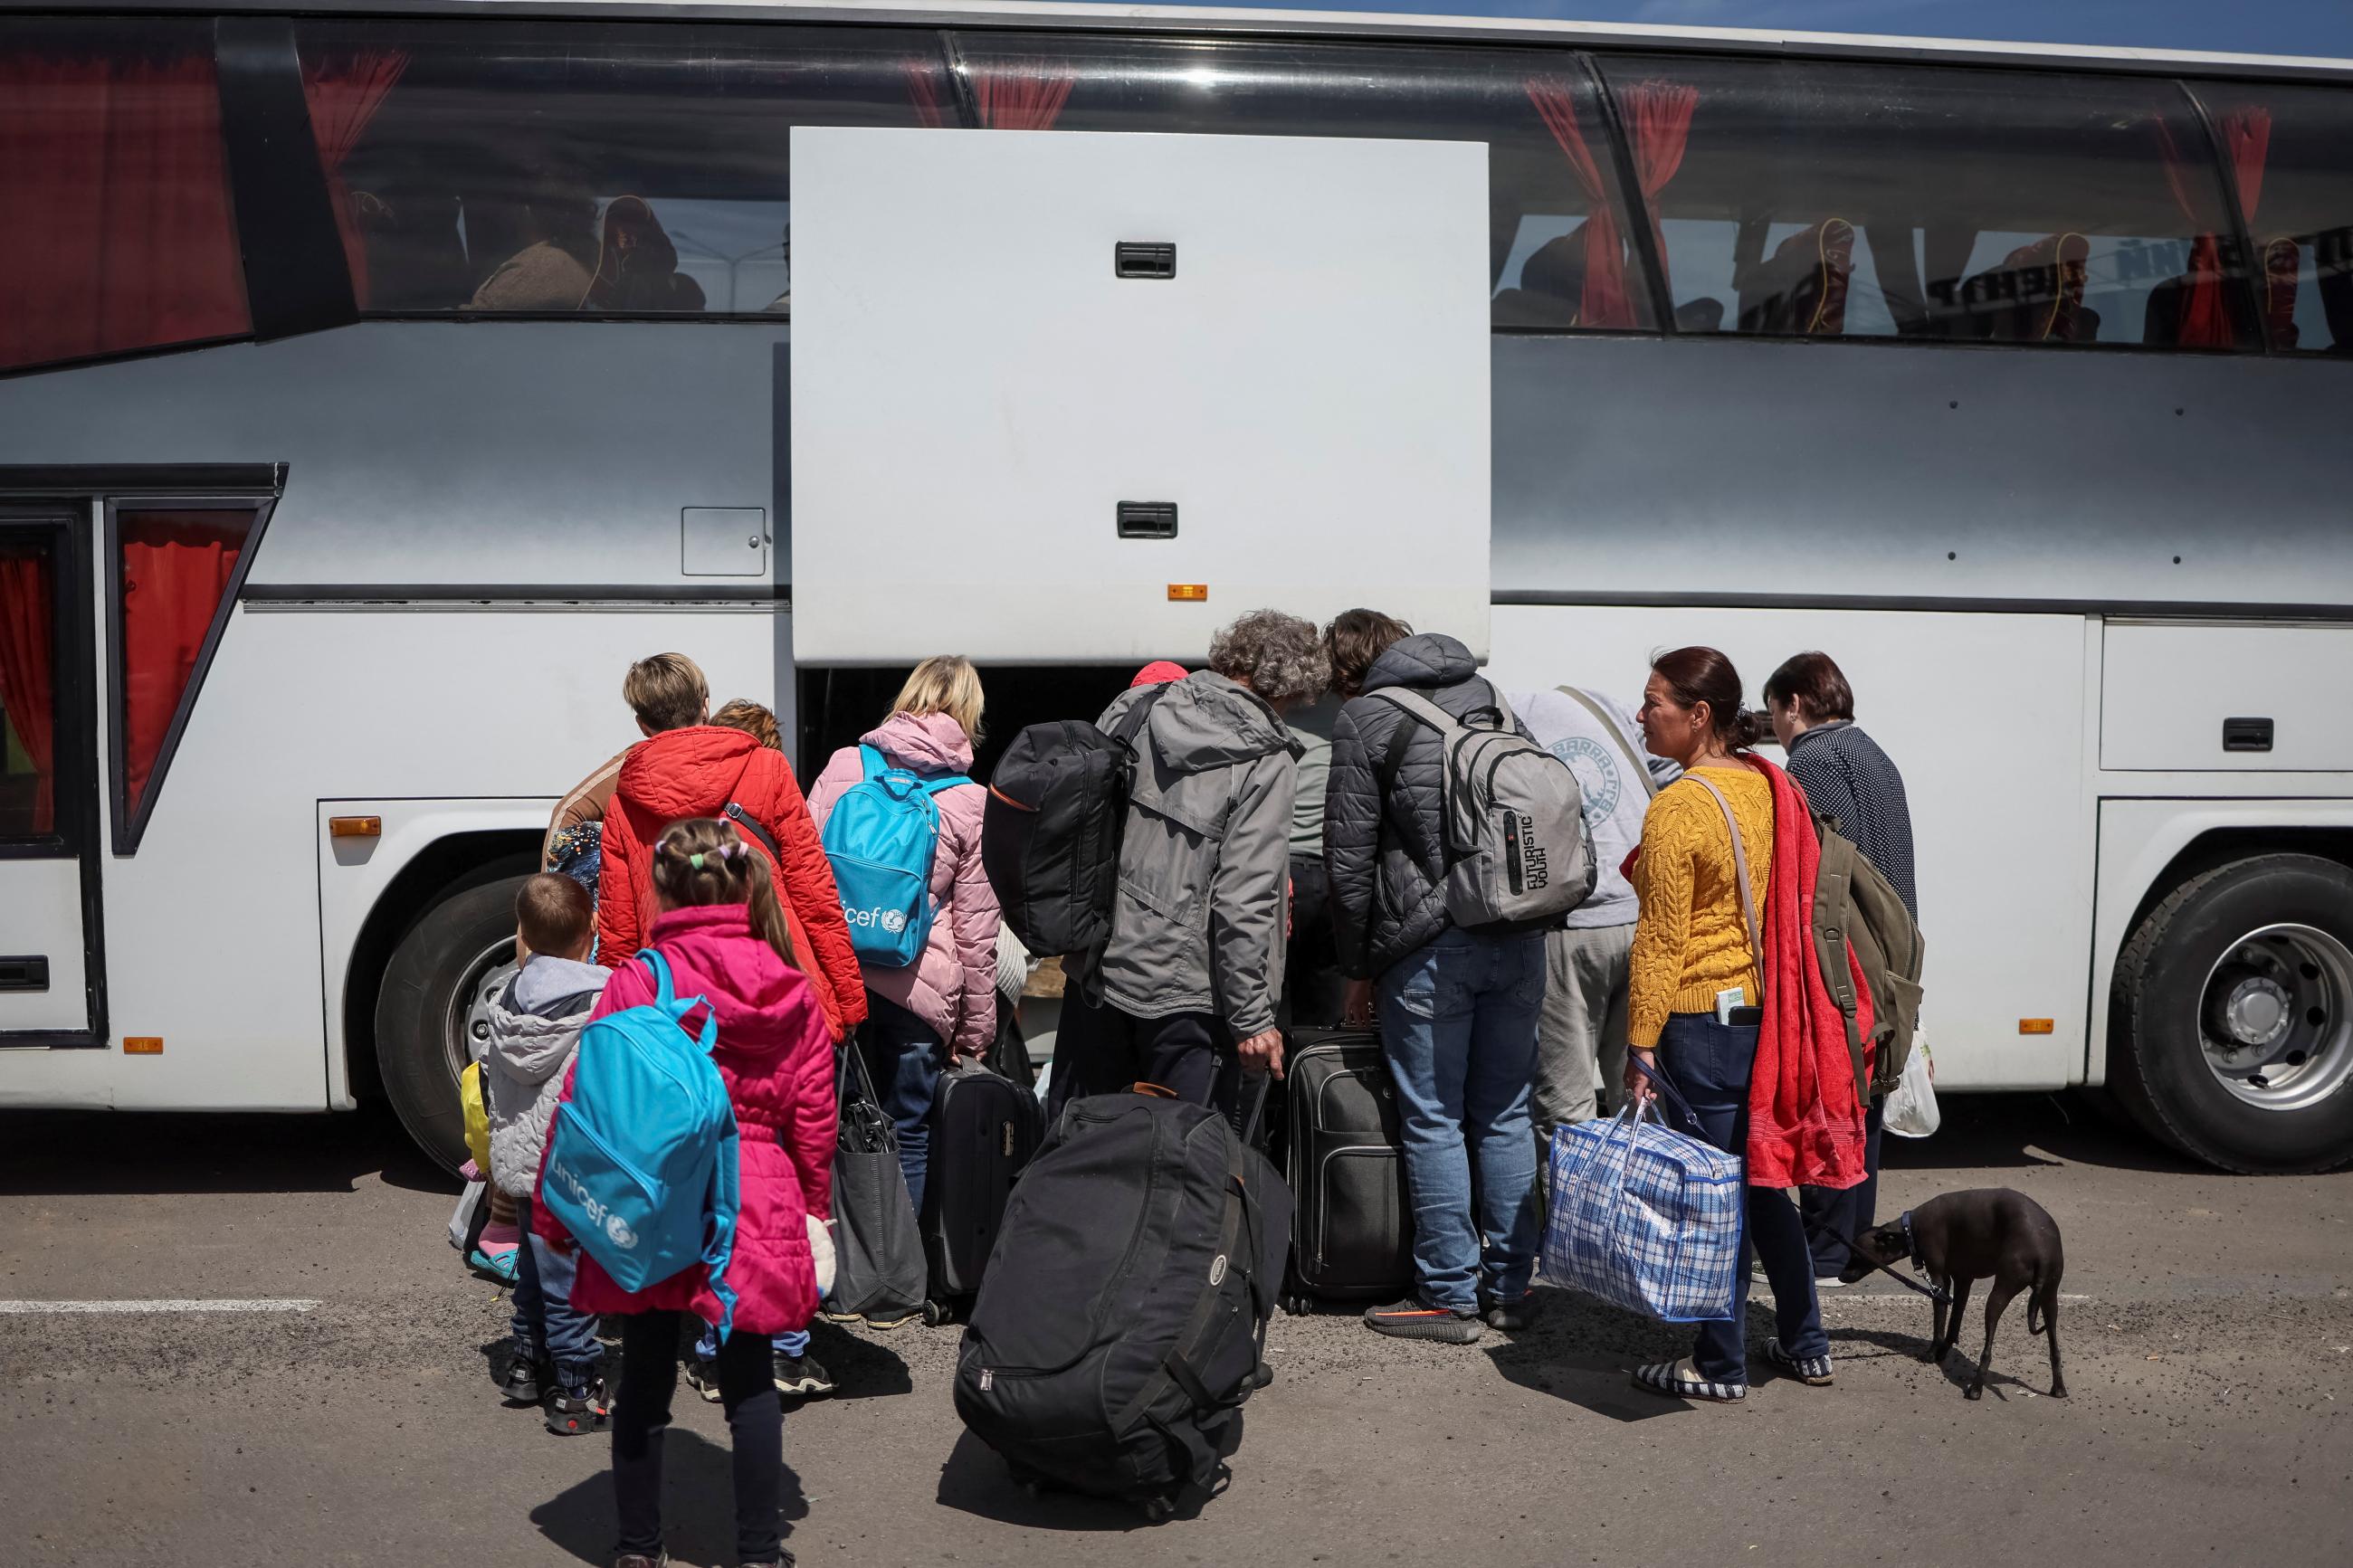 Ukrainian refugees from Mariupol region board a bus bound for Poland at a registration and humanitarian aid center for internally displaced people, amid Russia's ongoing invasion of Ukraine, in Zaporizhzhia, Ukraine May 17, 2022.